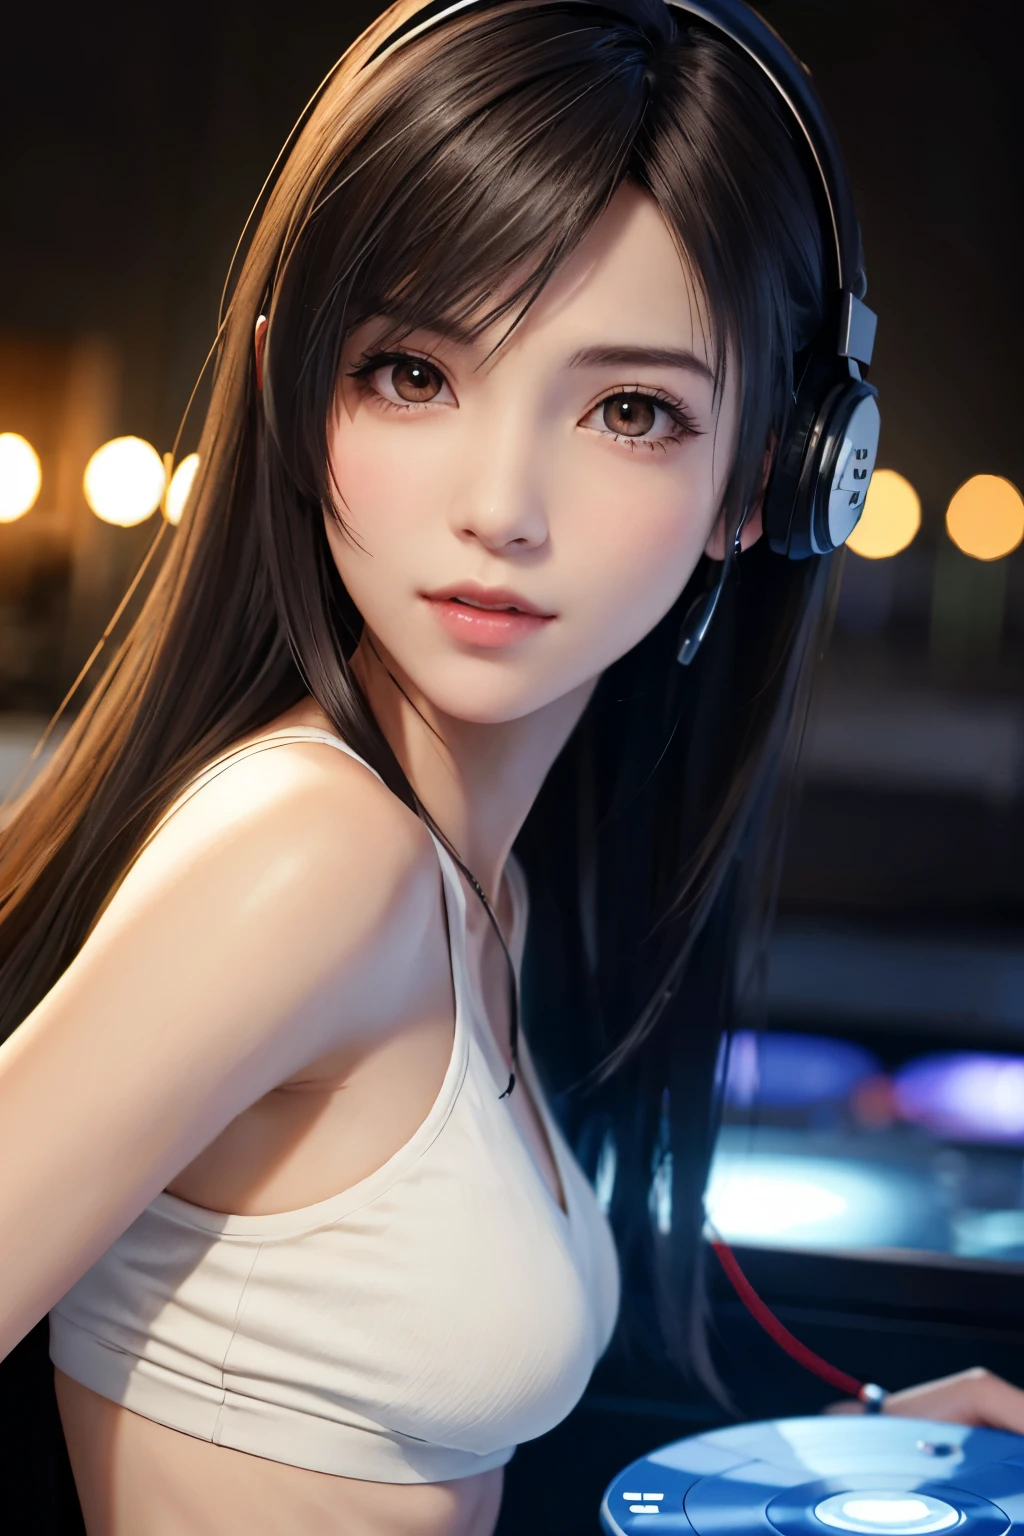 (Top Quality, Masterpiece: 1.1), (Realistic: 1.3), BREAK (((FF7,Tifa_lockhart))),Ultra-detailed face, Detailed eyes,(black Brown Hair, Large breasts: 1.2),(A dark, disco club,disc jockey,table:1.3), (crowd:1.2),  BREAK (wearing micro shorts, tube top:1.5,glowing headphones:1.2),clothed,(No Bra) ,(Small and beautiful hard nipple),(shiny oiled skin: 1.1), about 18 years old, BREAK ,excite in dance:1.3,smile,kawaii,zettai_ryouiki:1.1,sensual